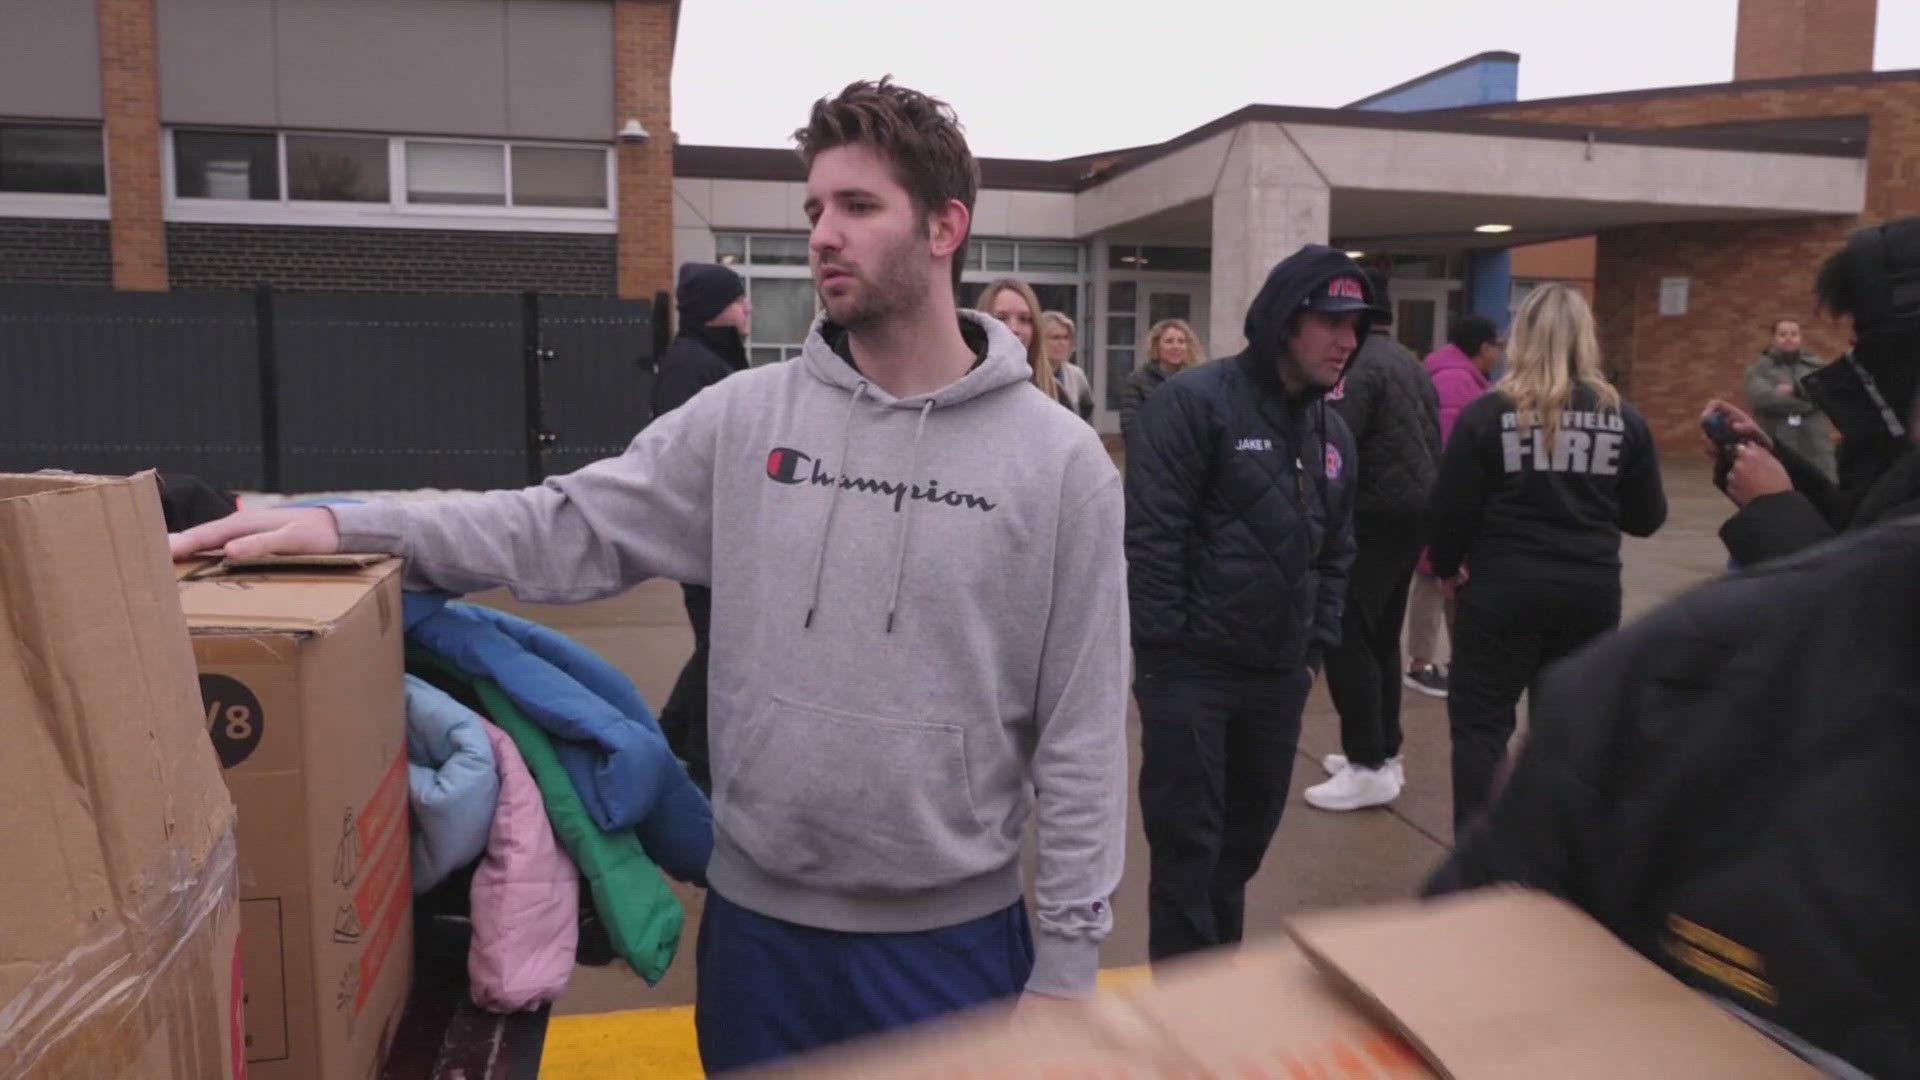 Josh Liljenquist recently helped the nonprofit Operation Warm bring coats inside a school for kids to have. He said he gives away all the money he earns from videos.